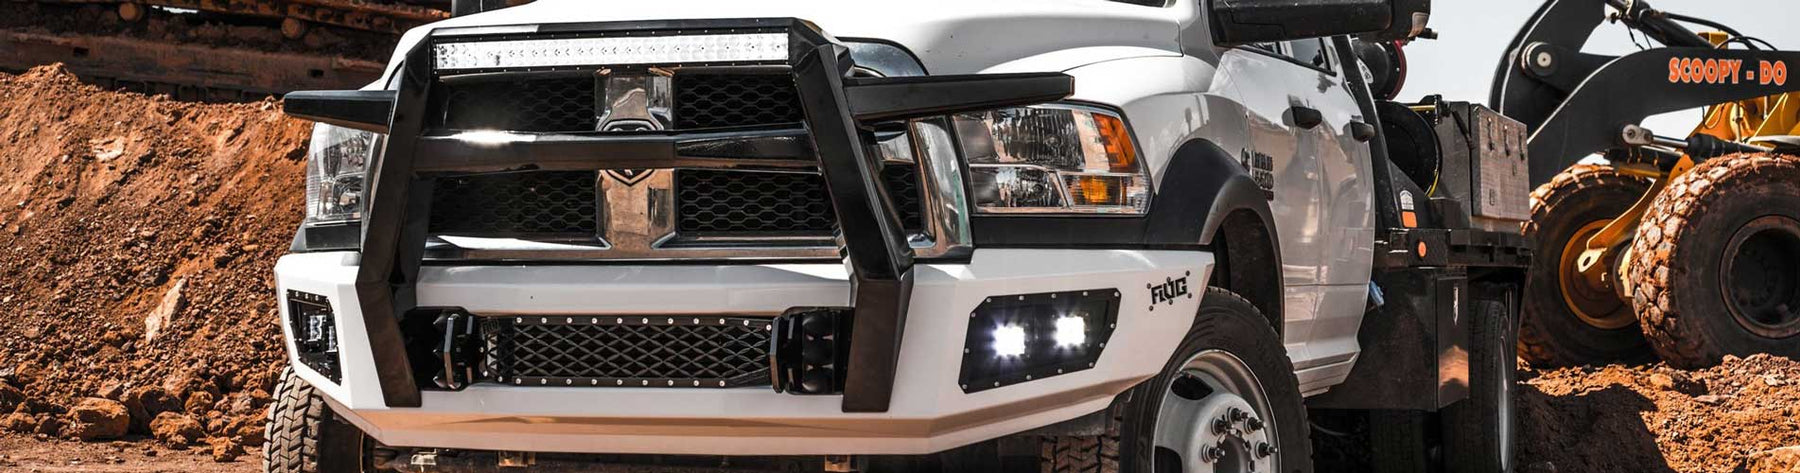 Steel Front Bumper Guard: What It Means for Your Truck